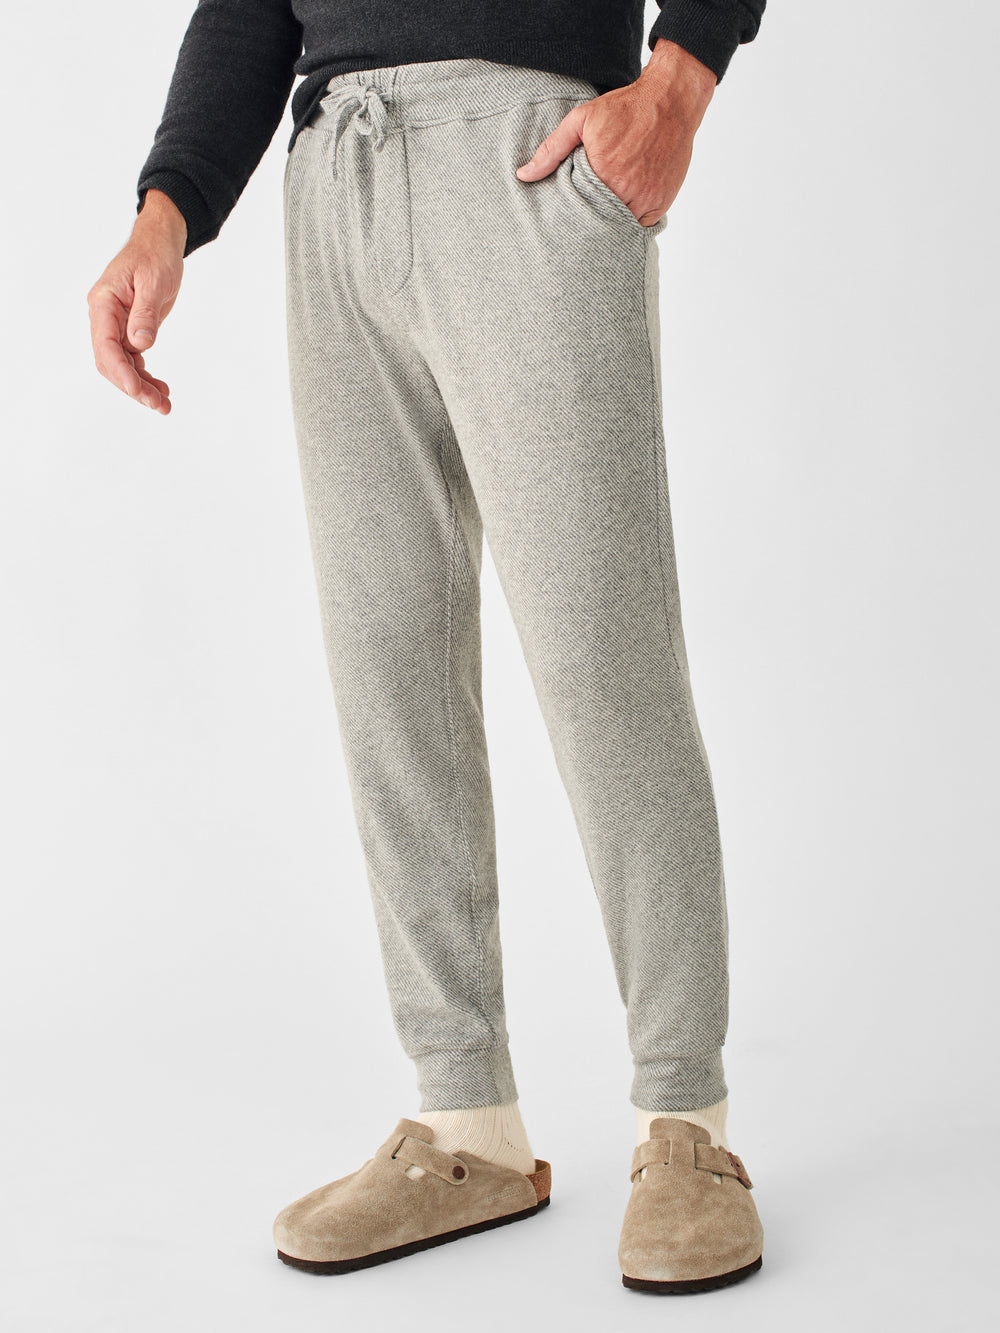 LEGEND SWEATPANT-FOSSIL GREY TWILL - Kingfisher Road - Online Boutique